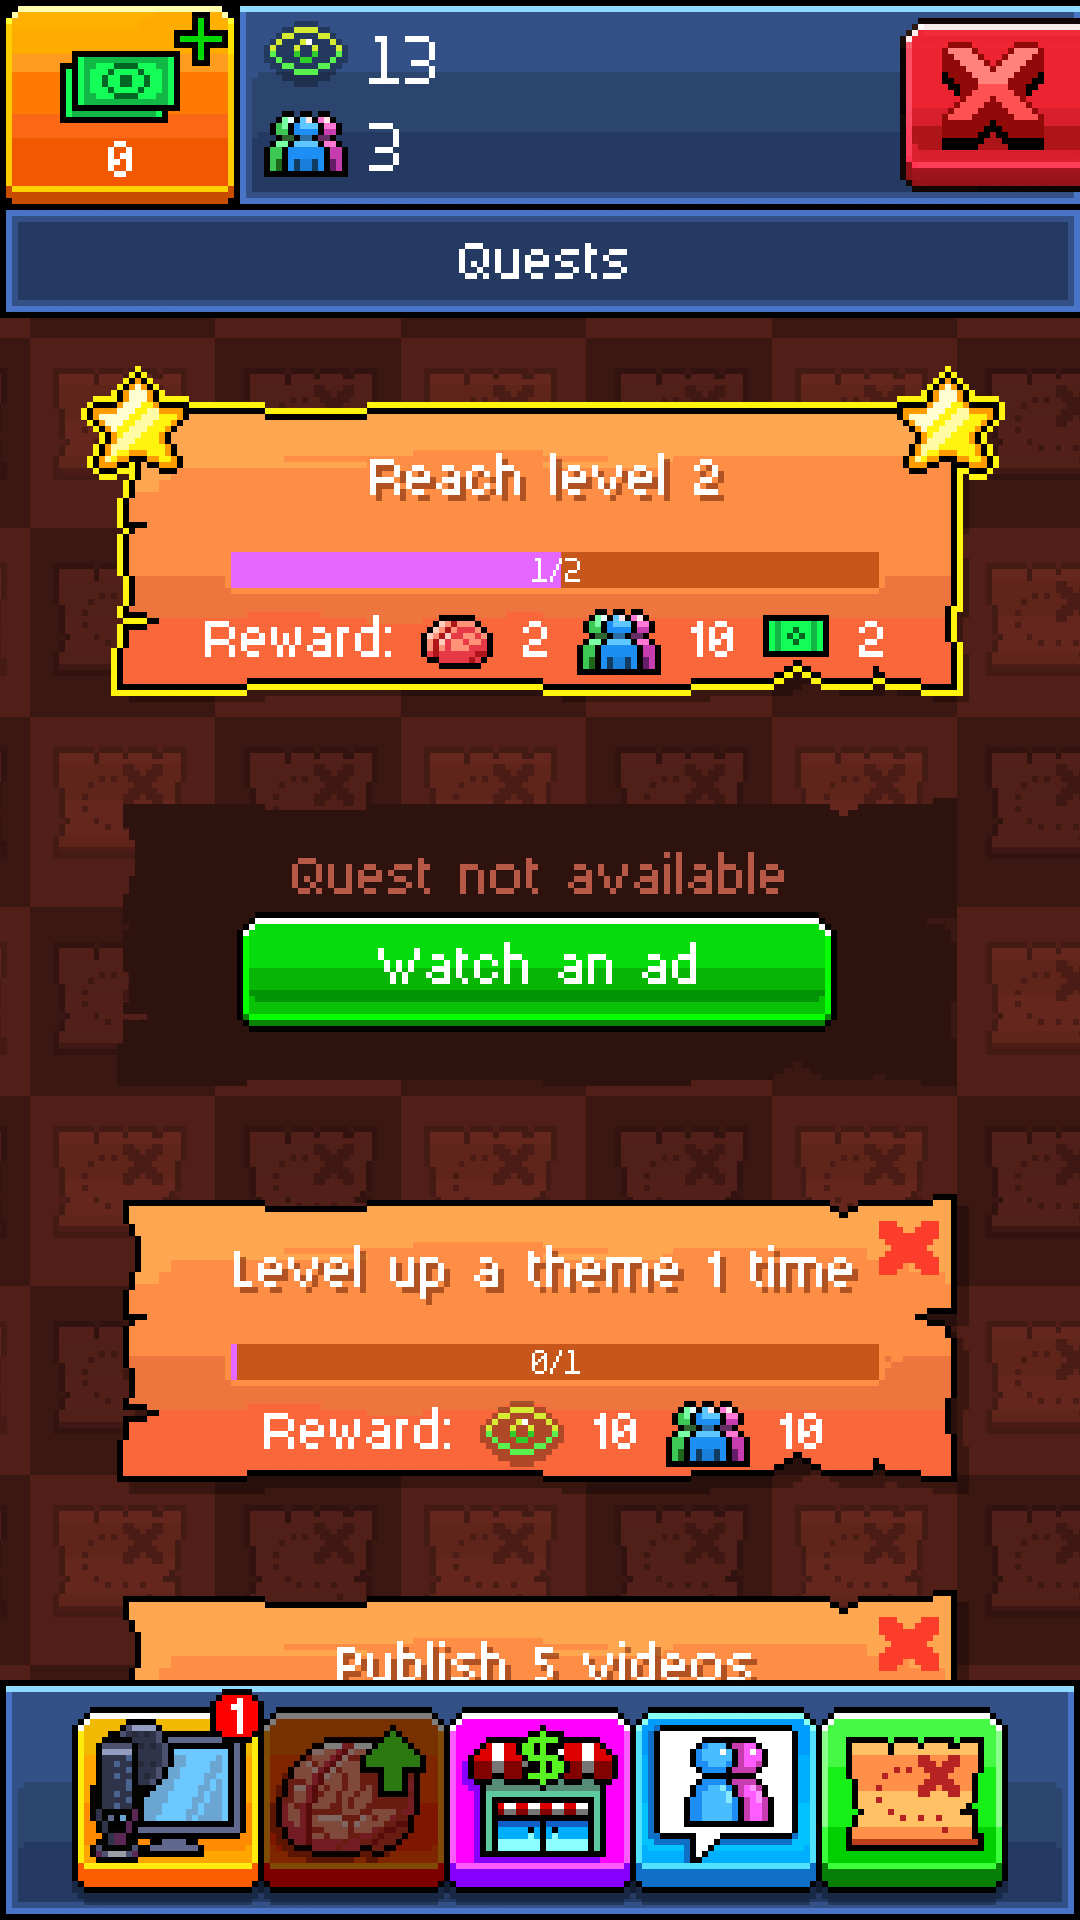 When quests are not available, you can watch an add